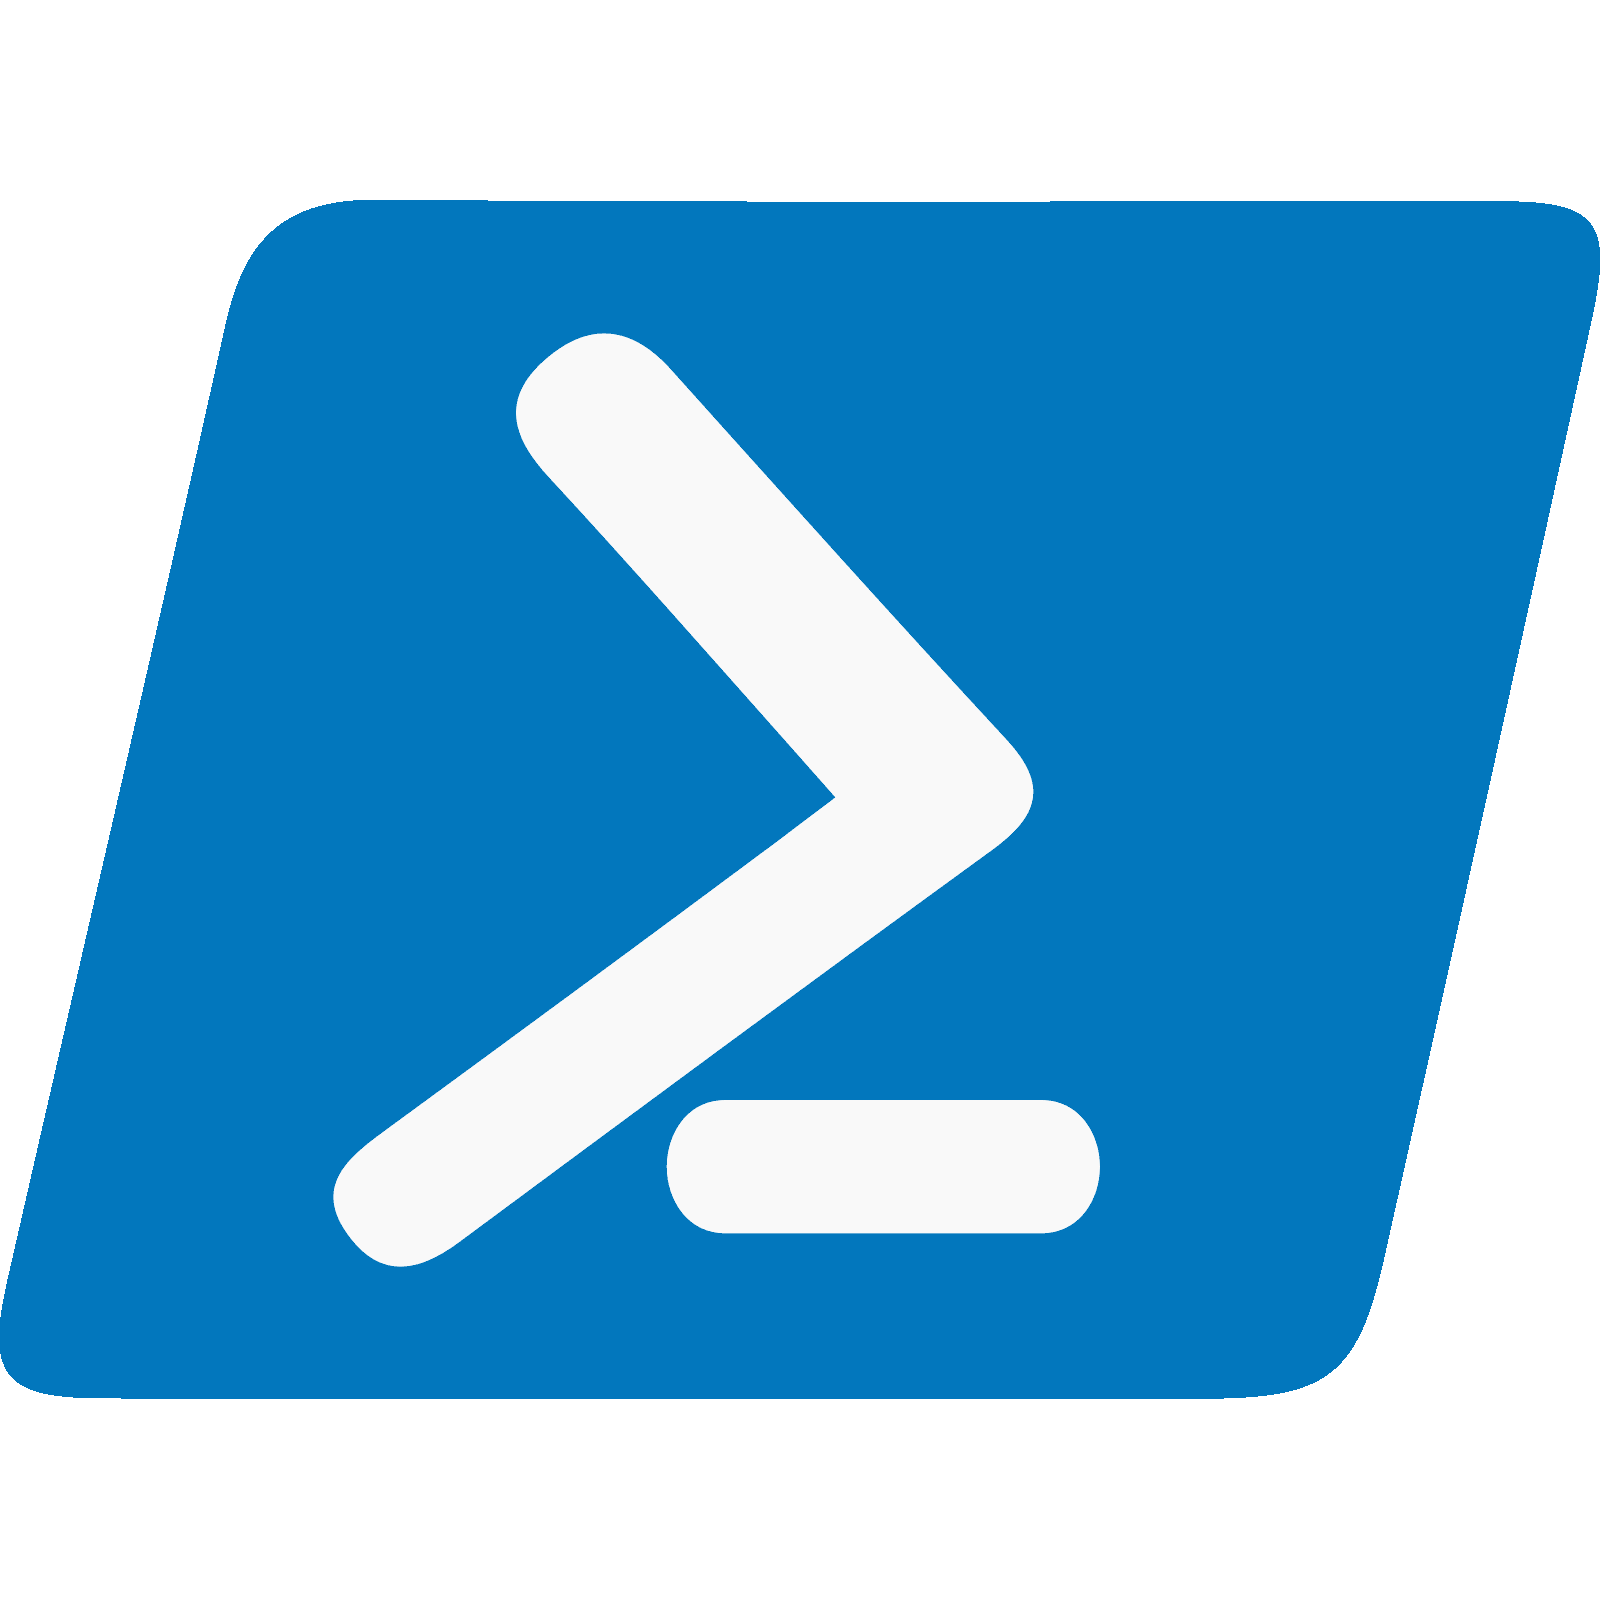 Powershell script to restart a service based on the ping of multiple IP addresses